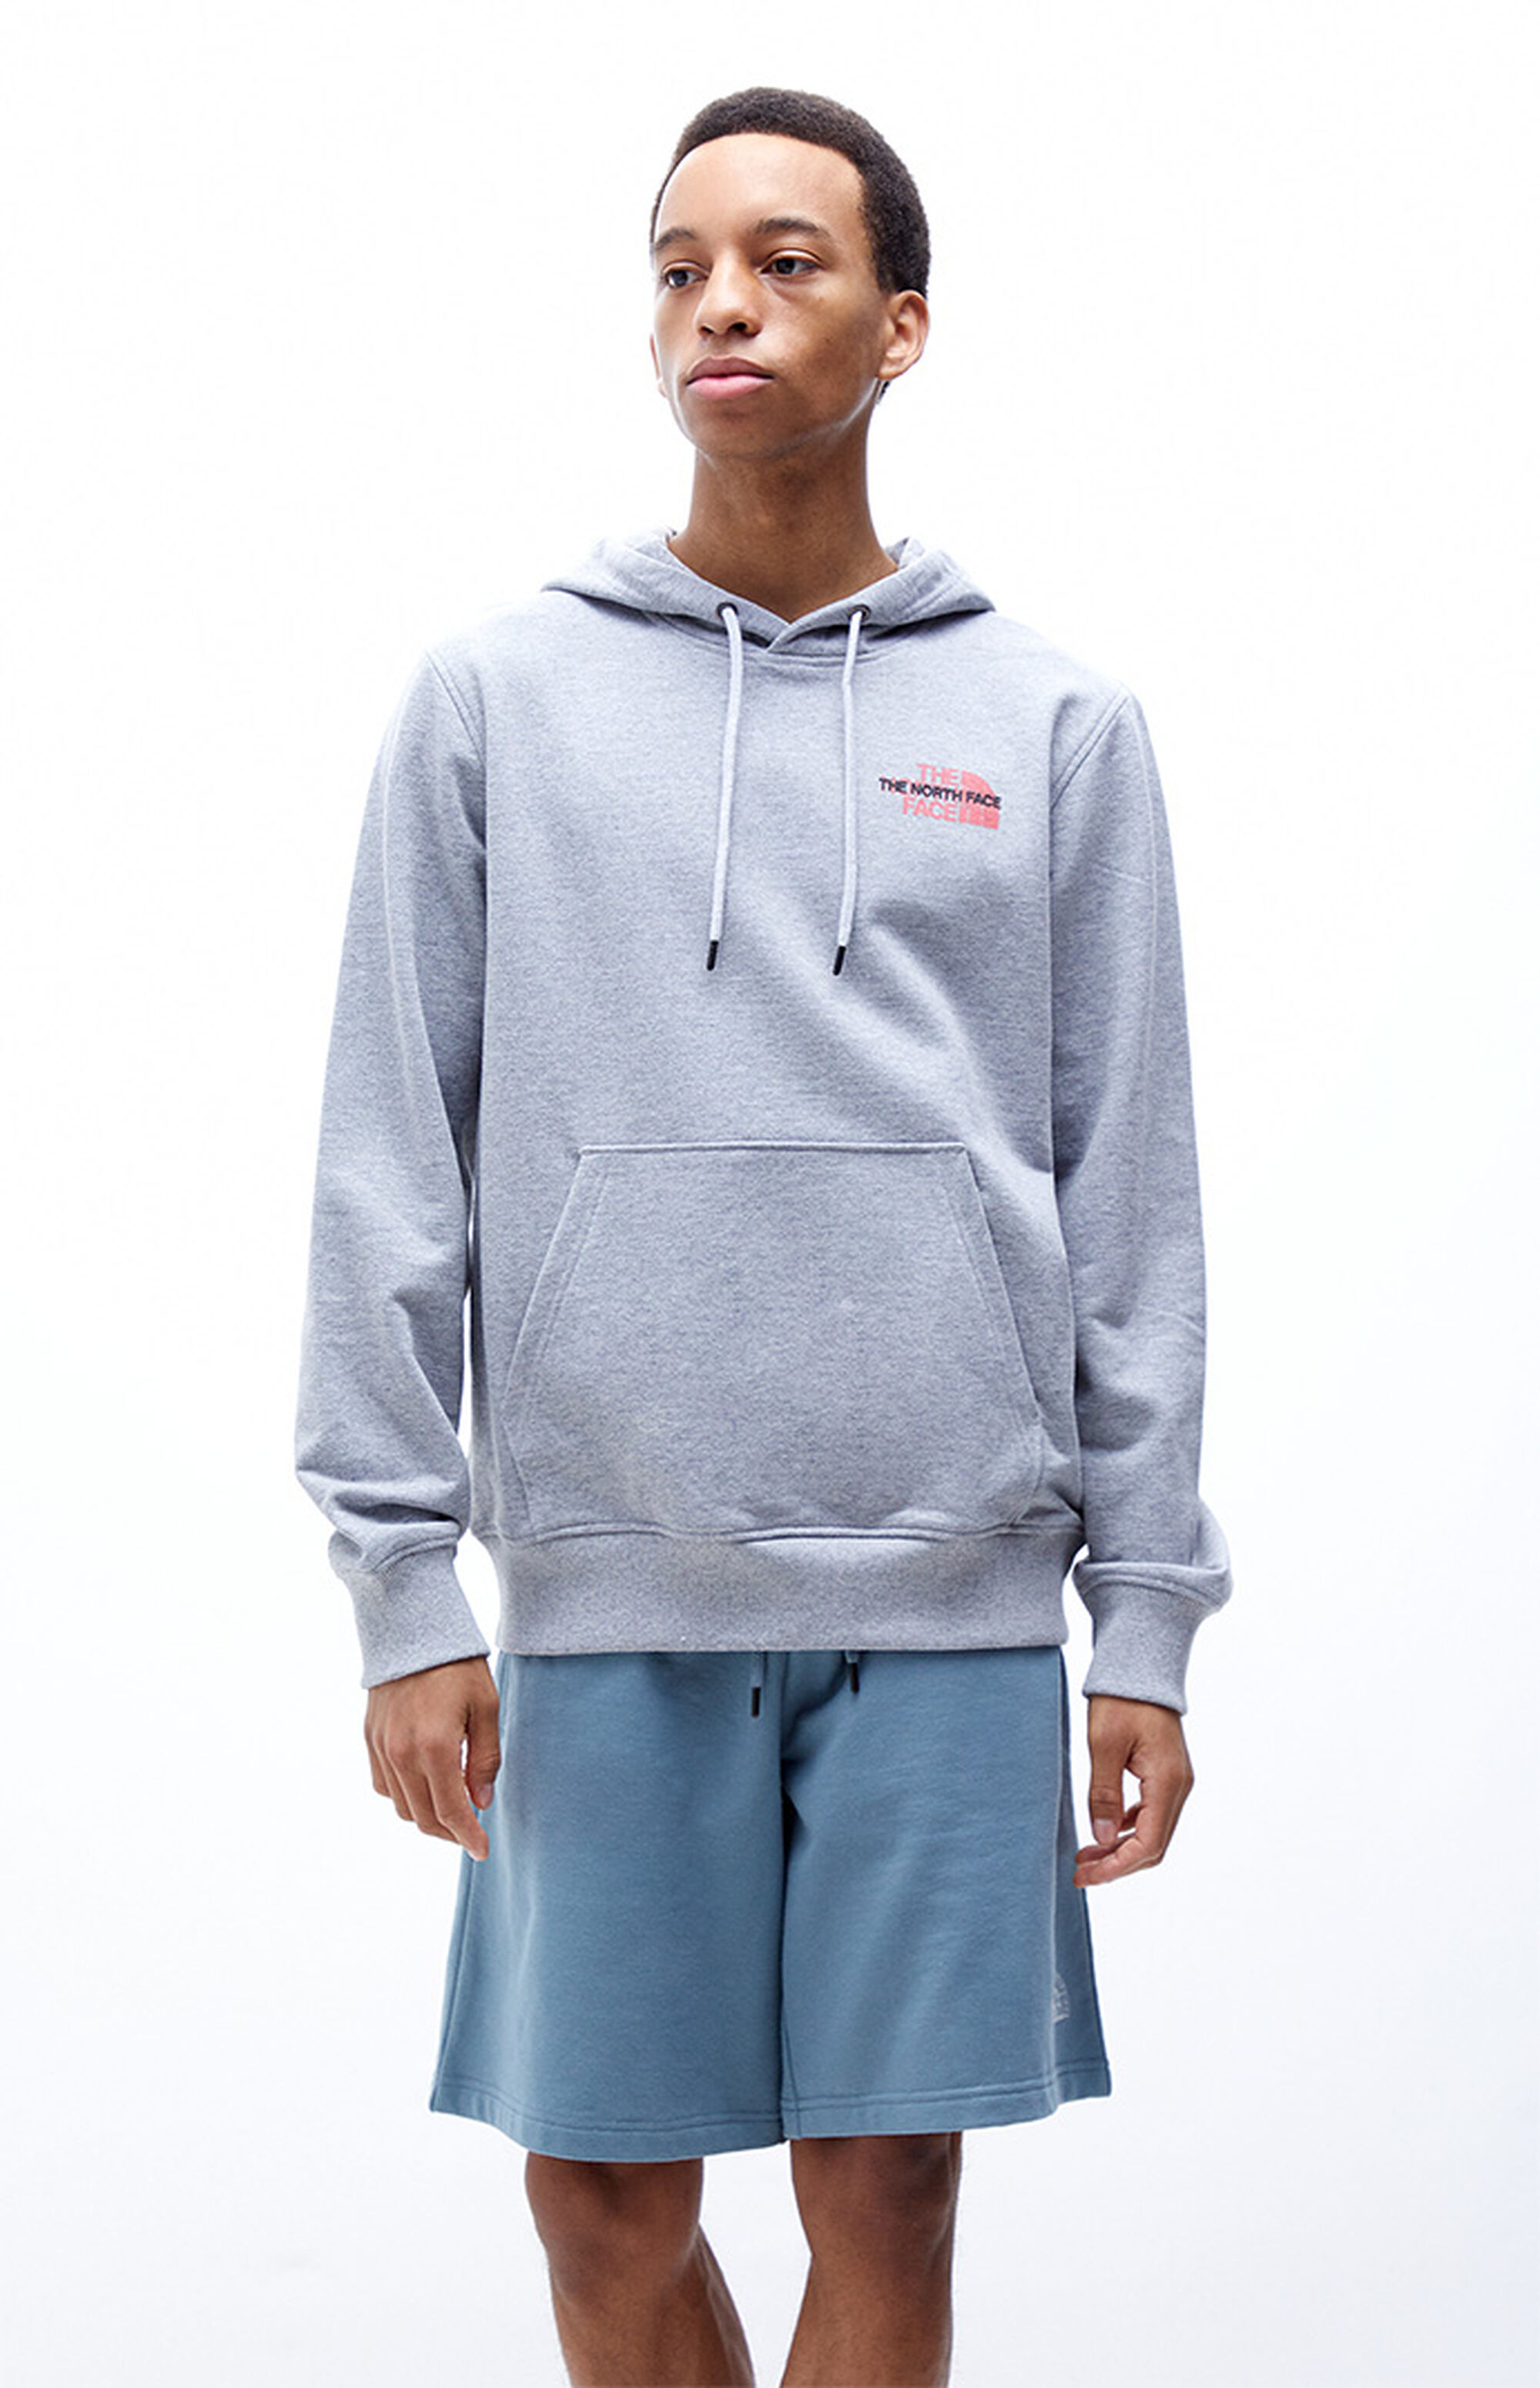 The North Face Coordinates Hoodie | PacSun